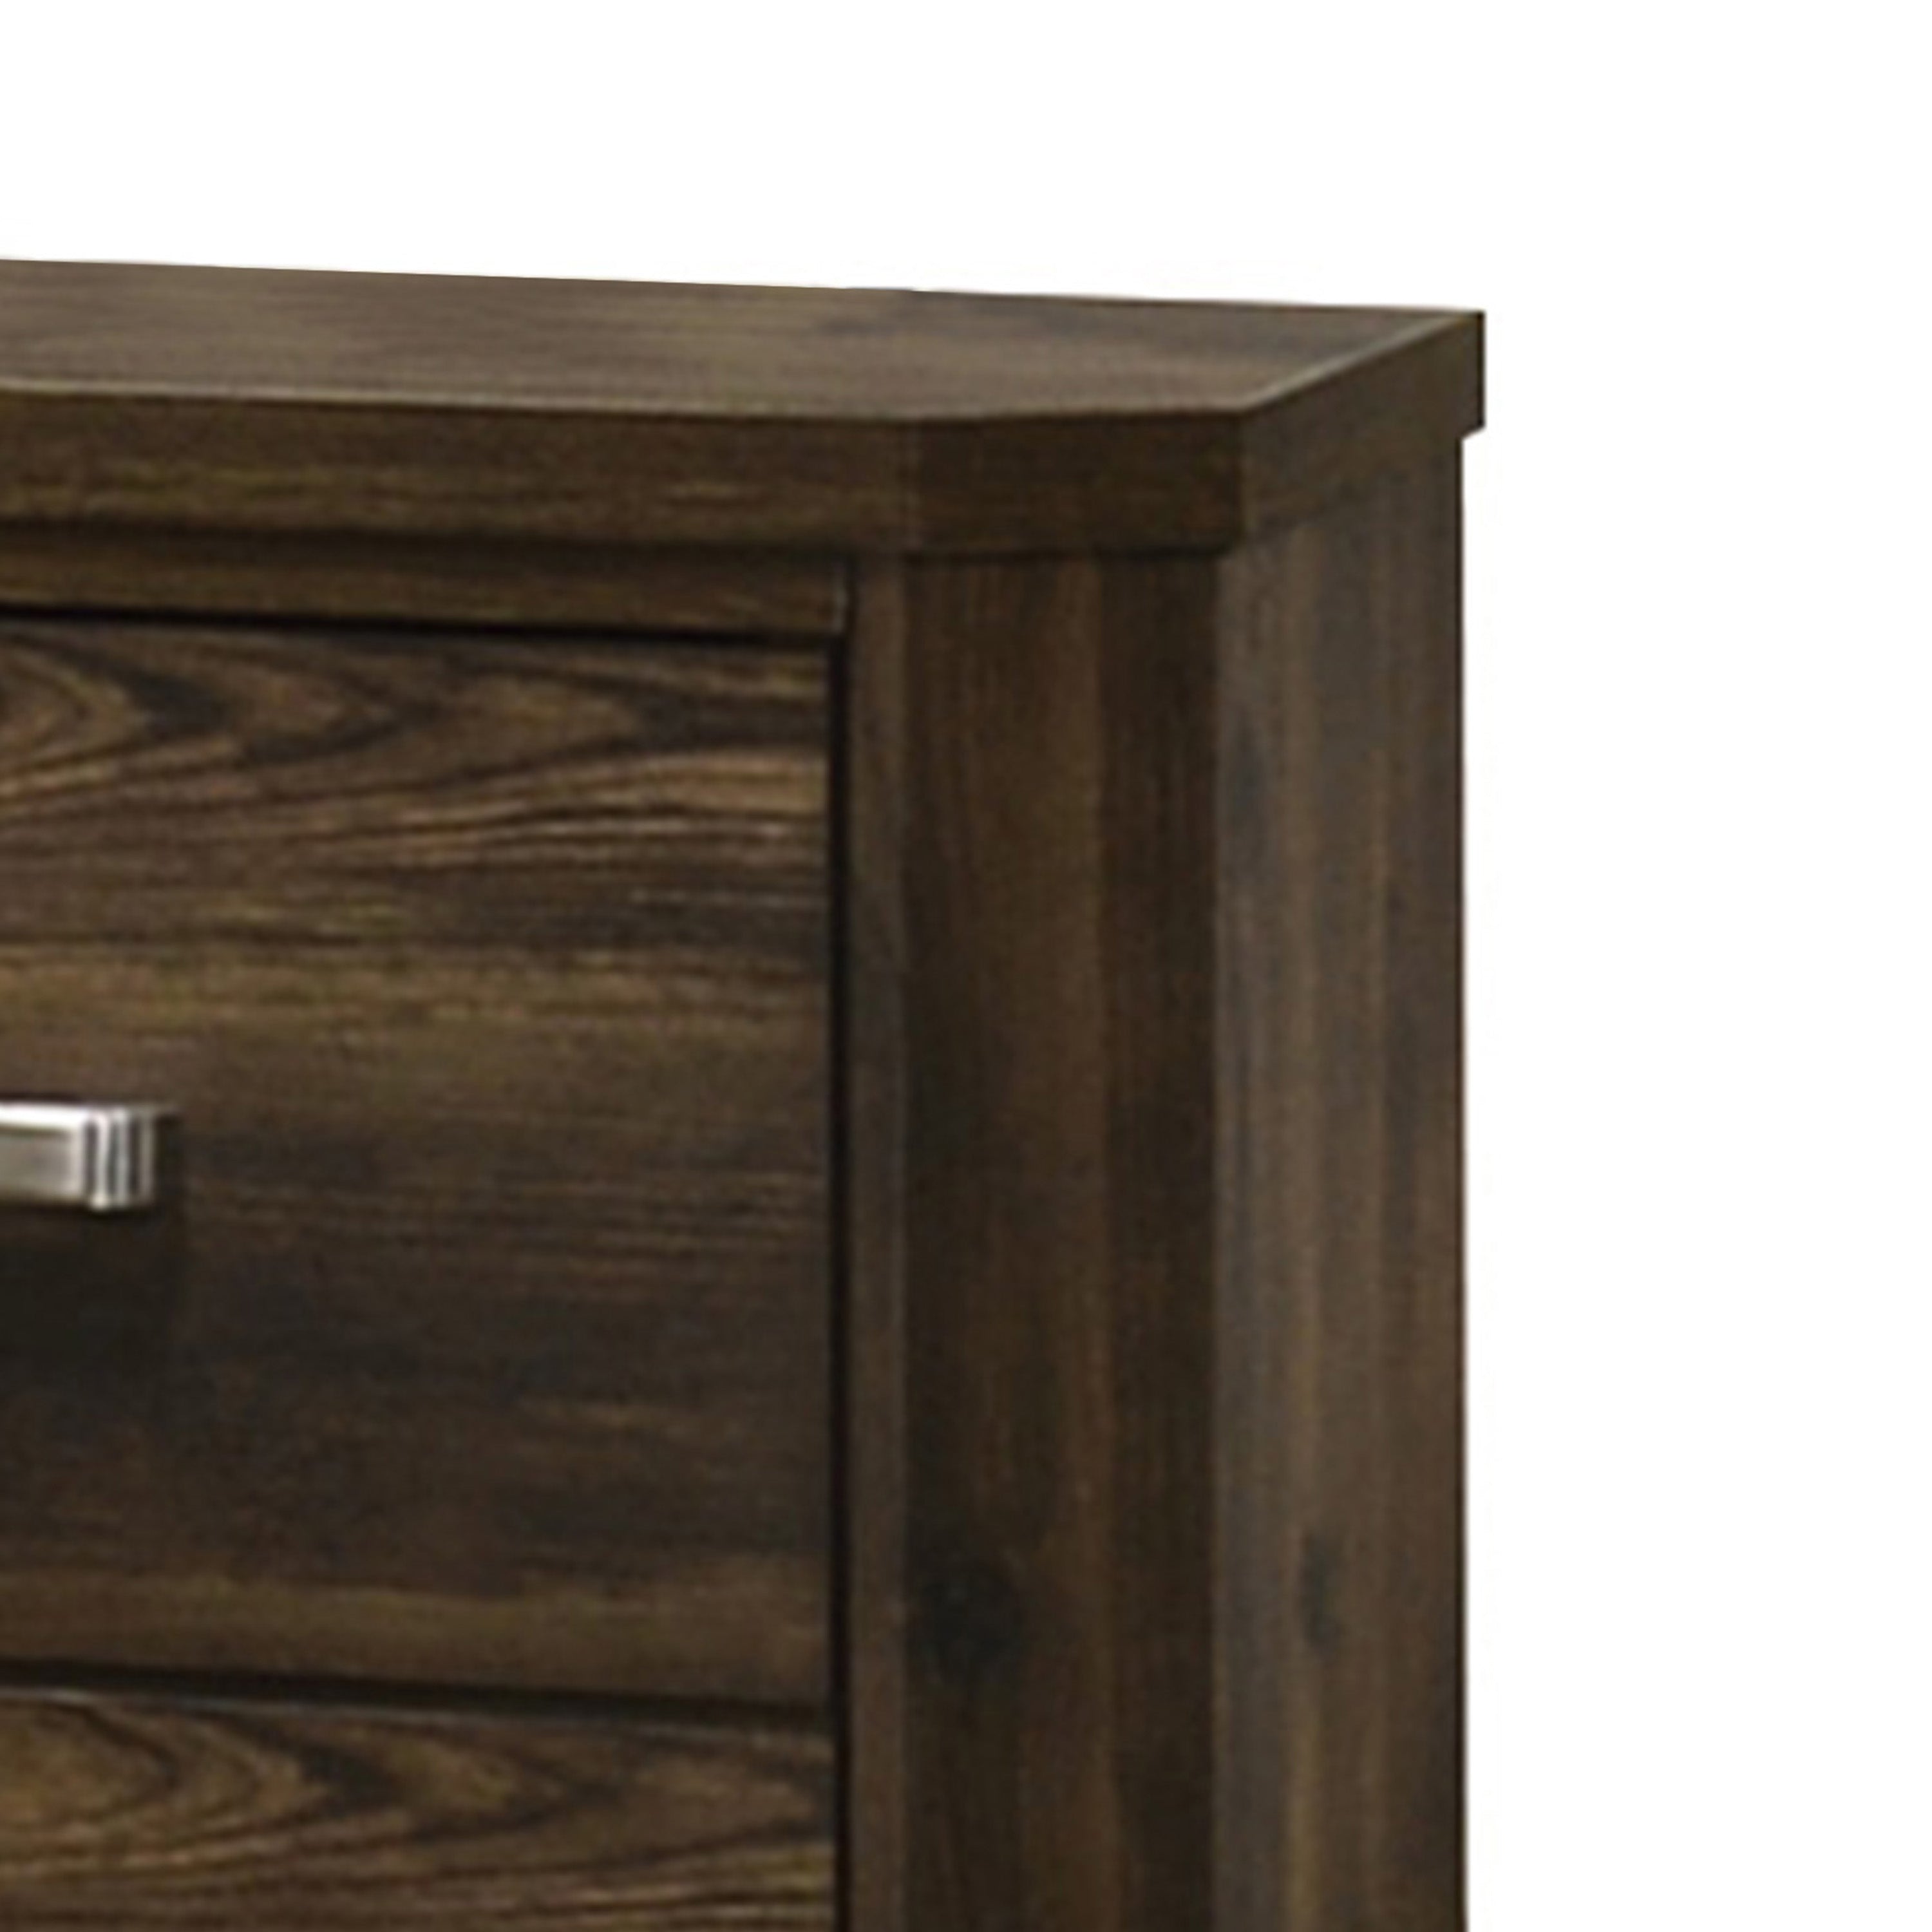 Transitional Style 2 Drawer Wooden Nightstand with Plinth Base, Brown